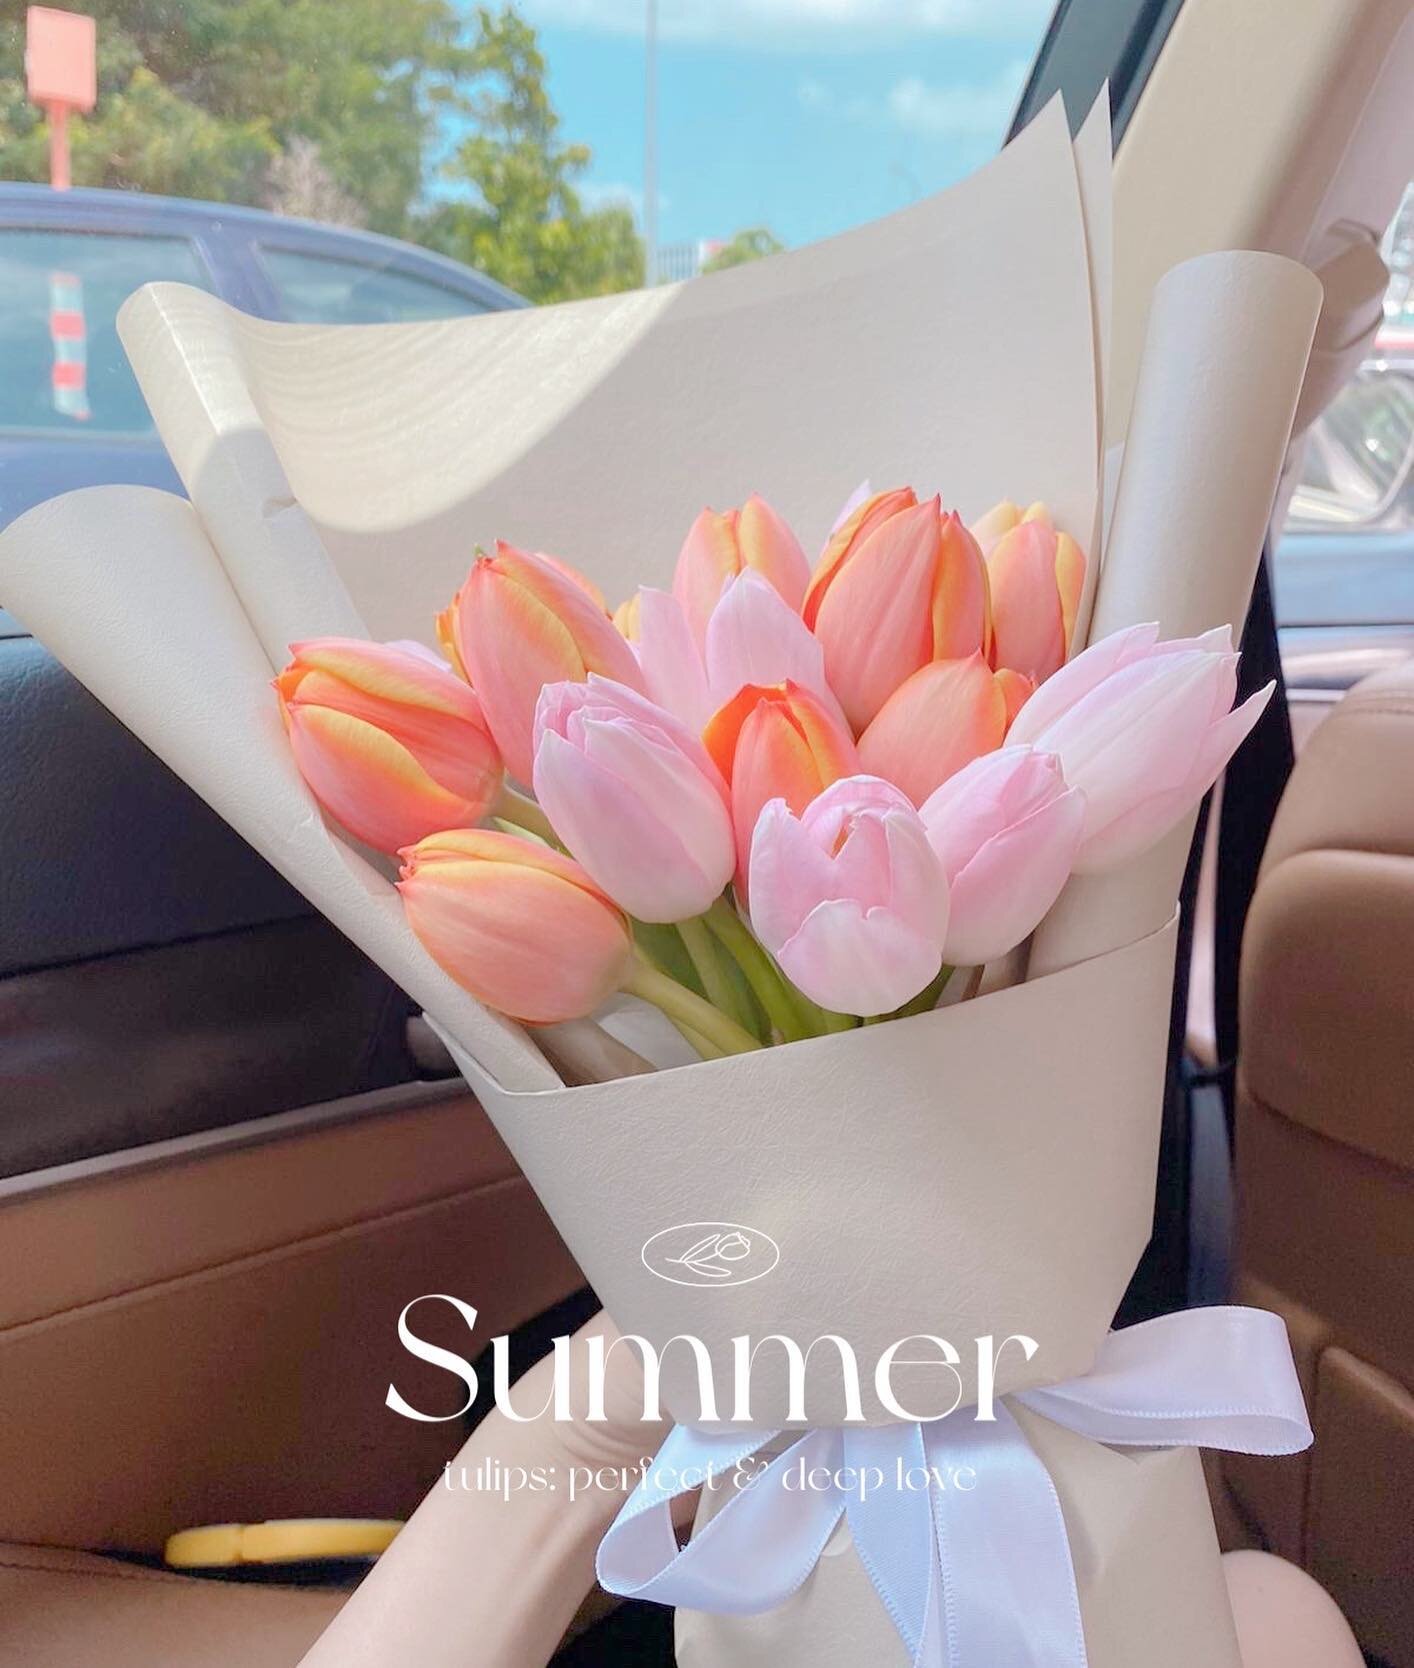 The meaning of tulips;
Perfect &amp; Deep Love
Ideal to give to someone you have a deep, unconditional love for 💕 
#didyouknow #summerlove

Shop now at www.moodfleur.com/shop
Do place your orders 1-2 days in advance!